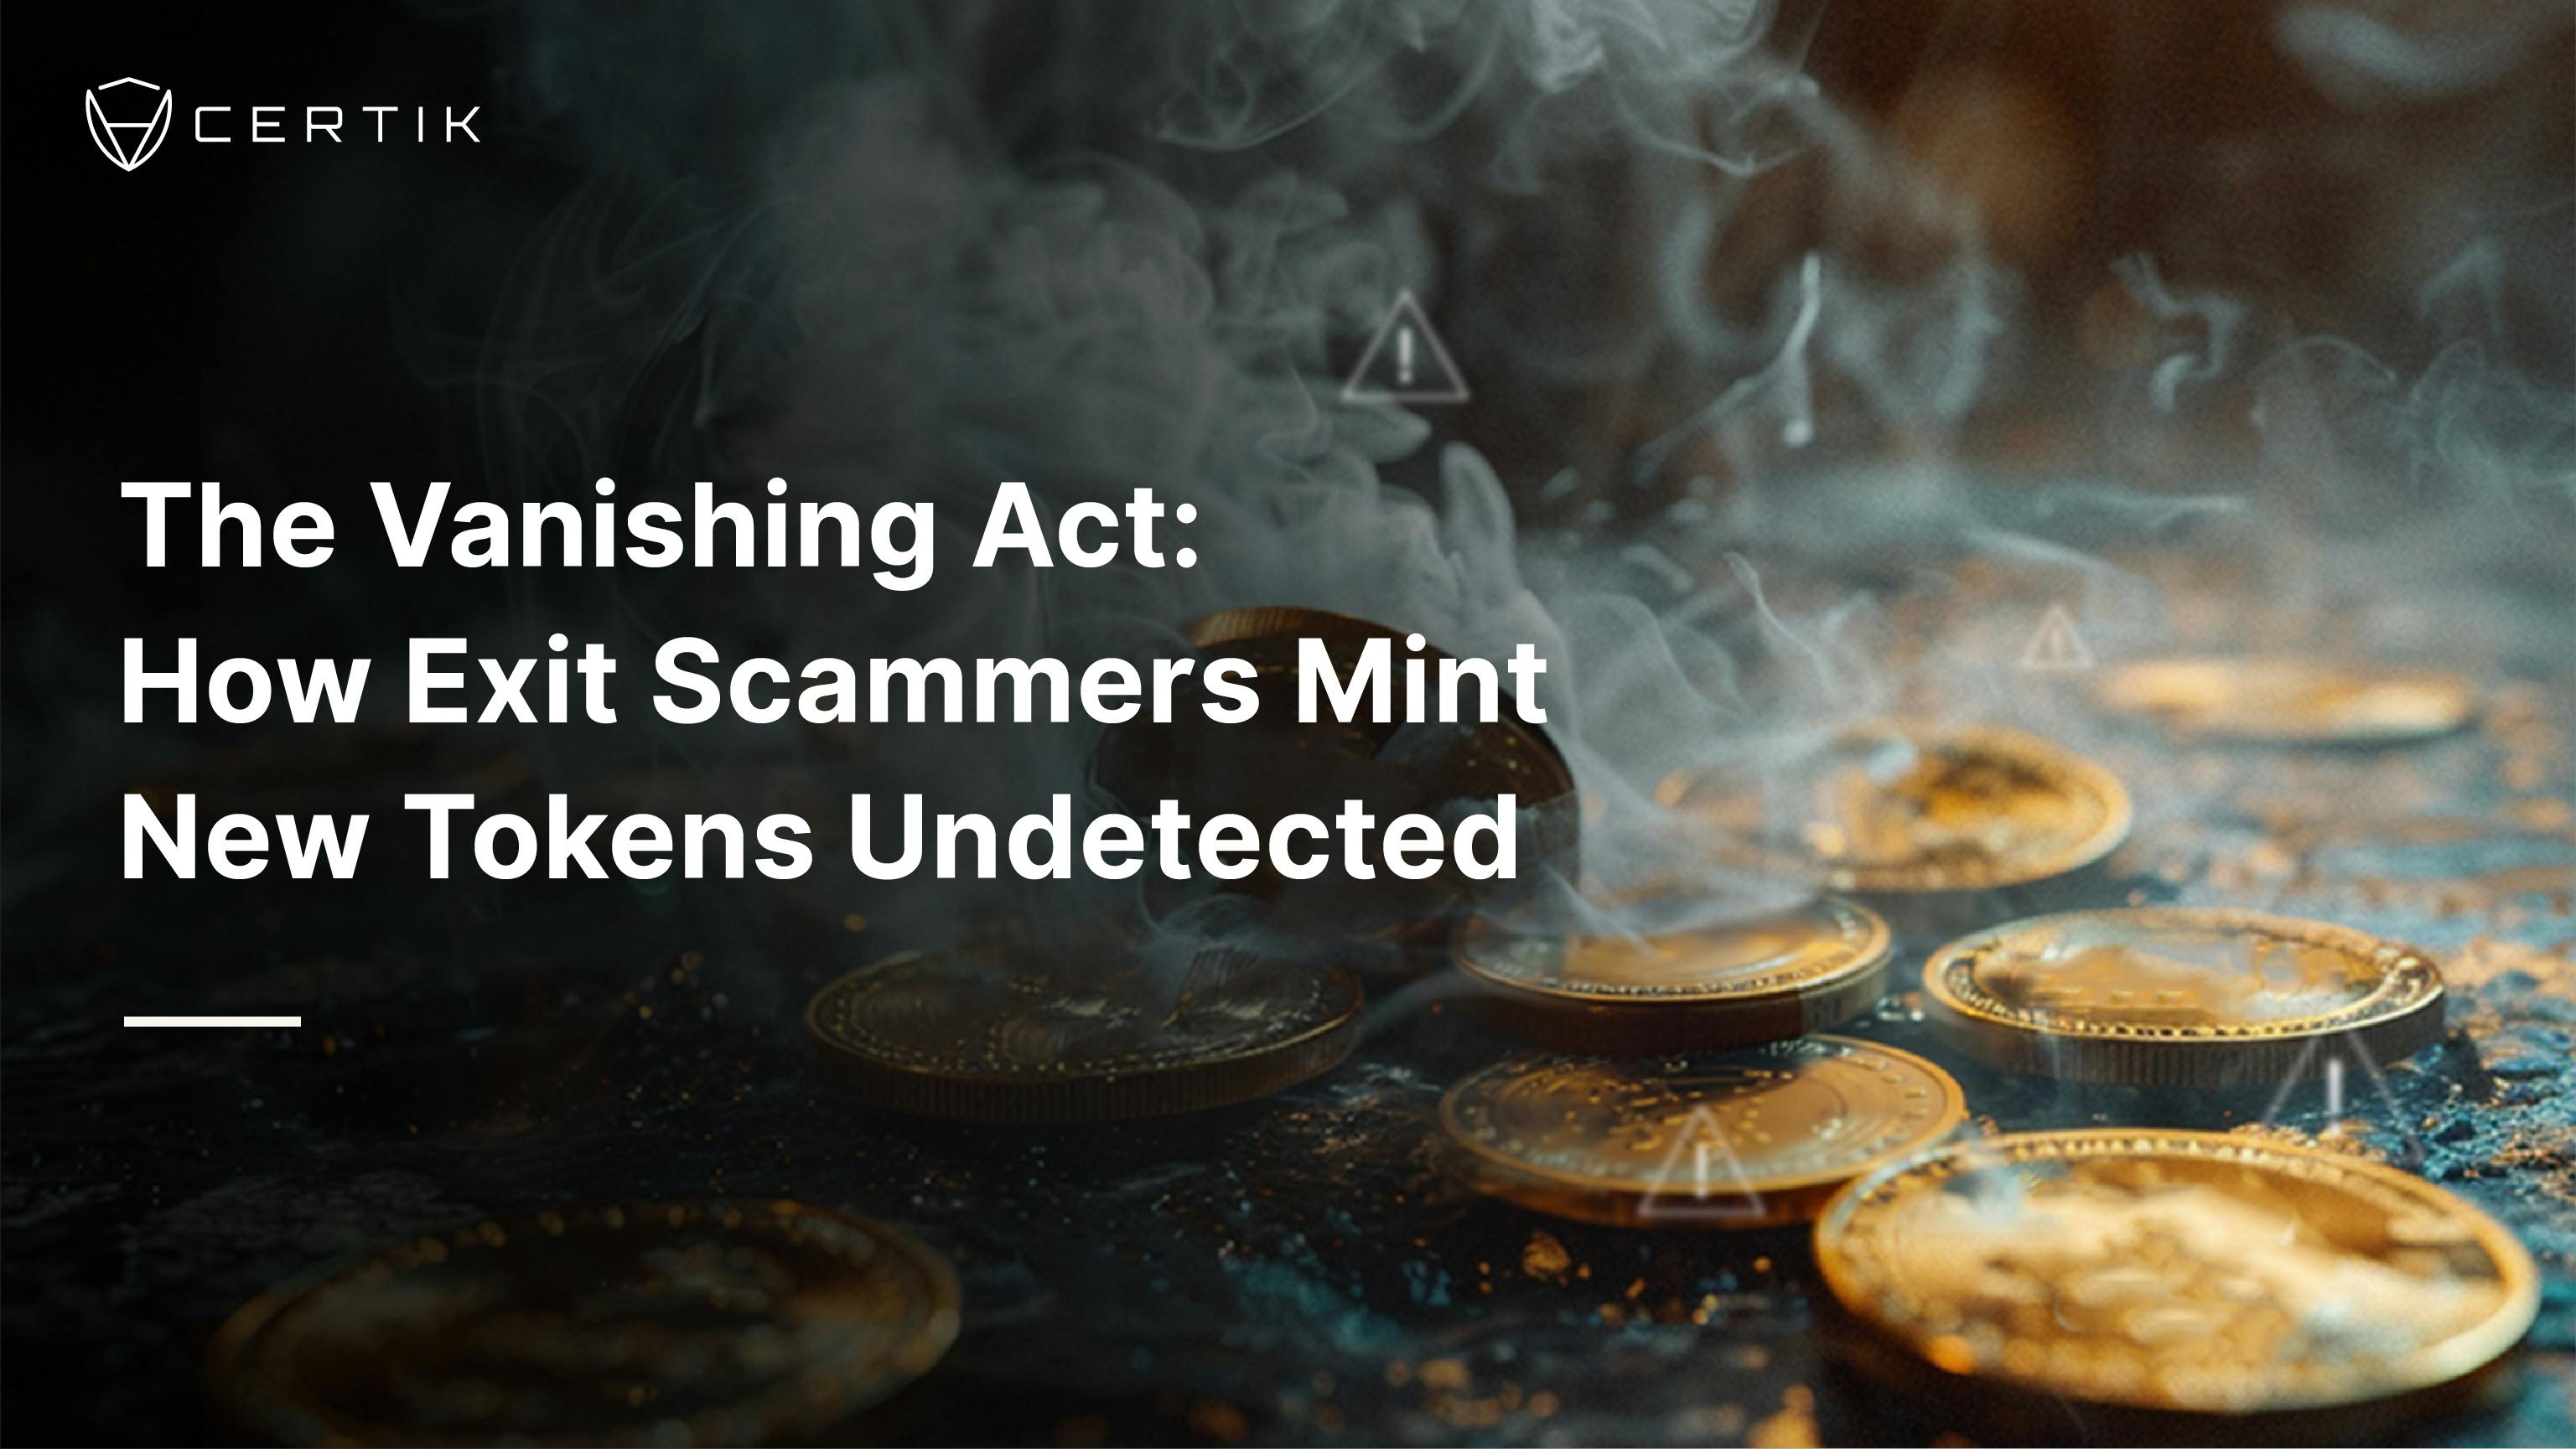 The Vanishing Act: How Exit Scammers Mint New Tokens Undetected